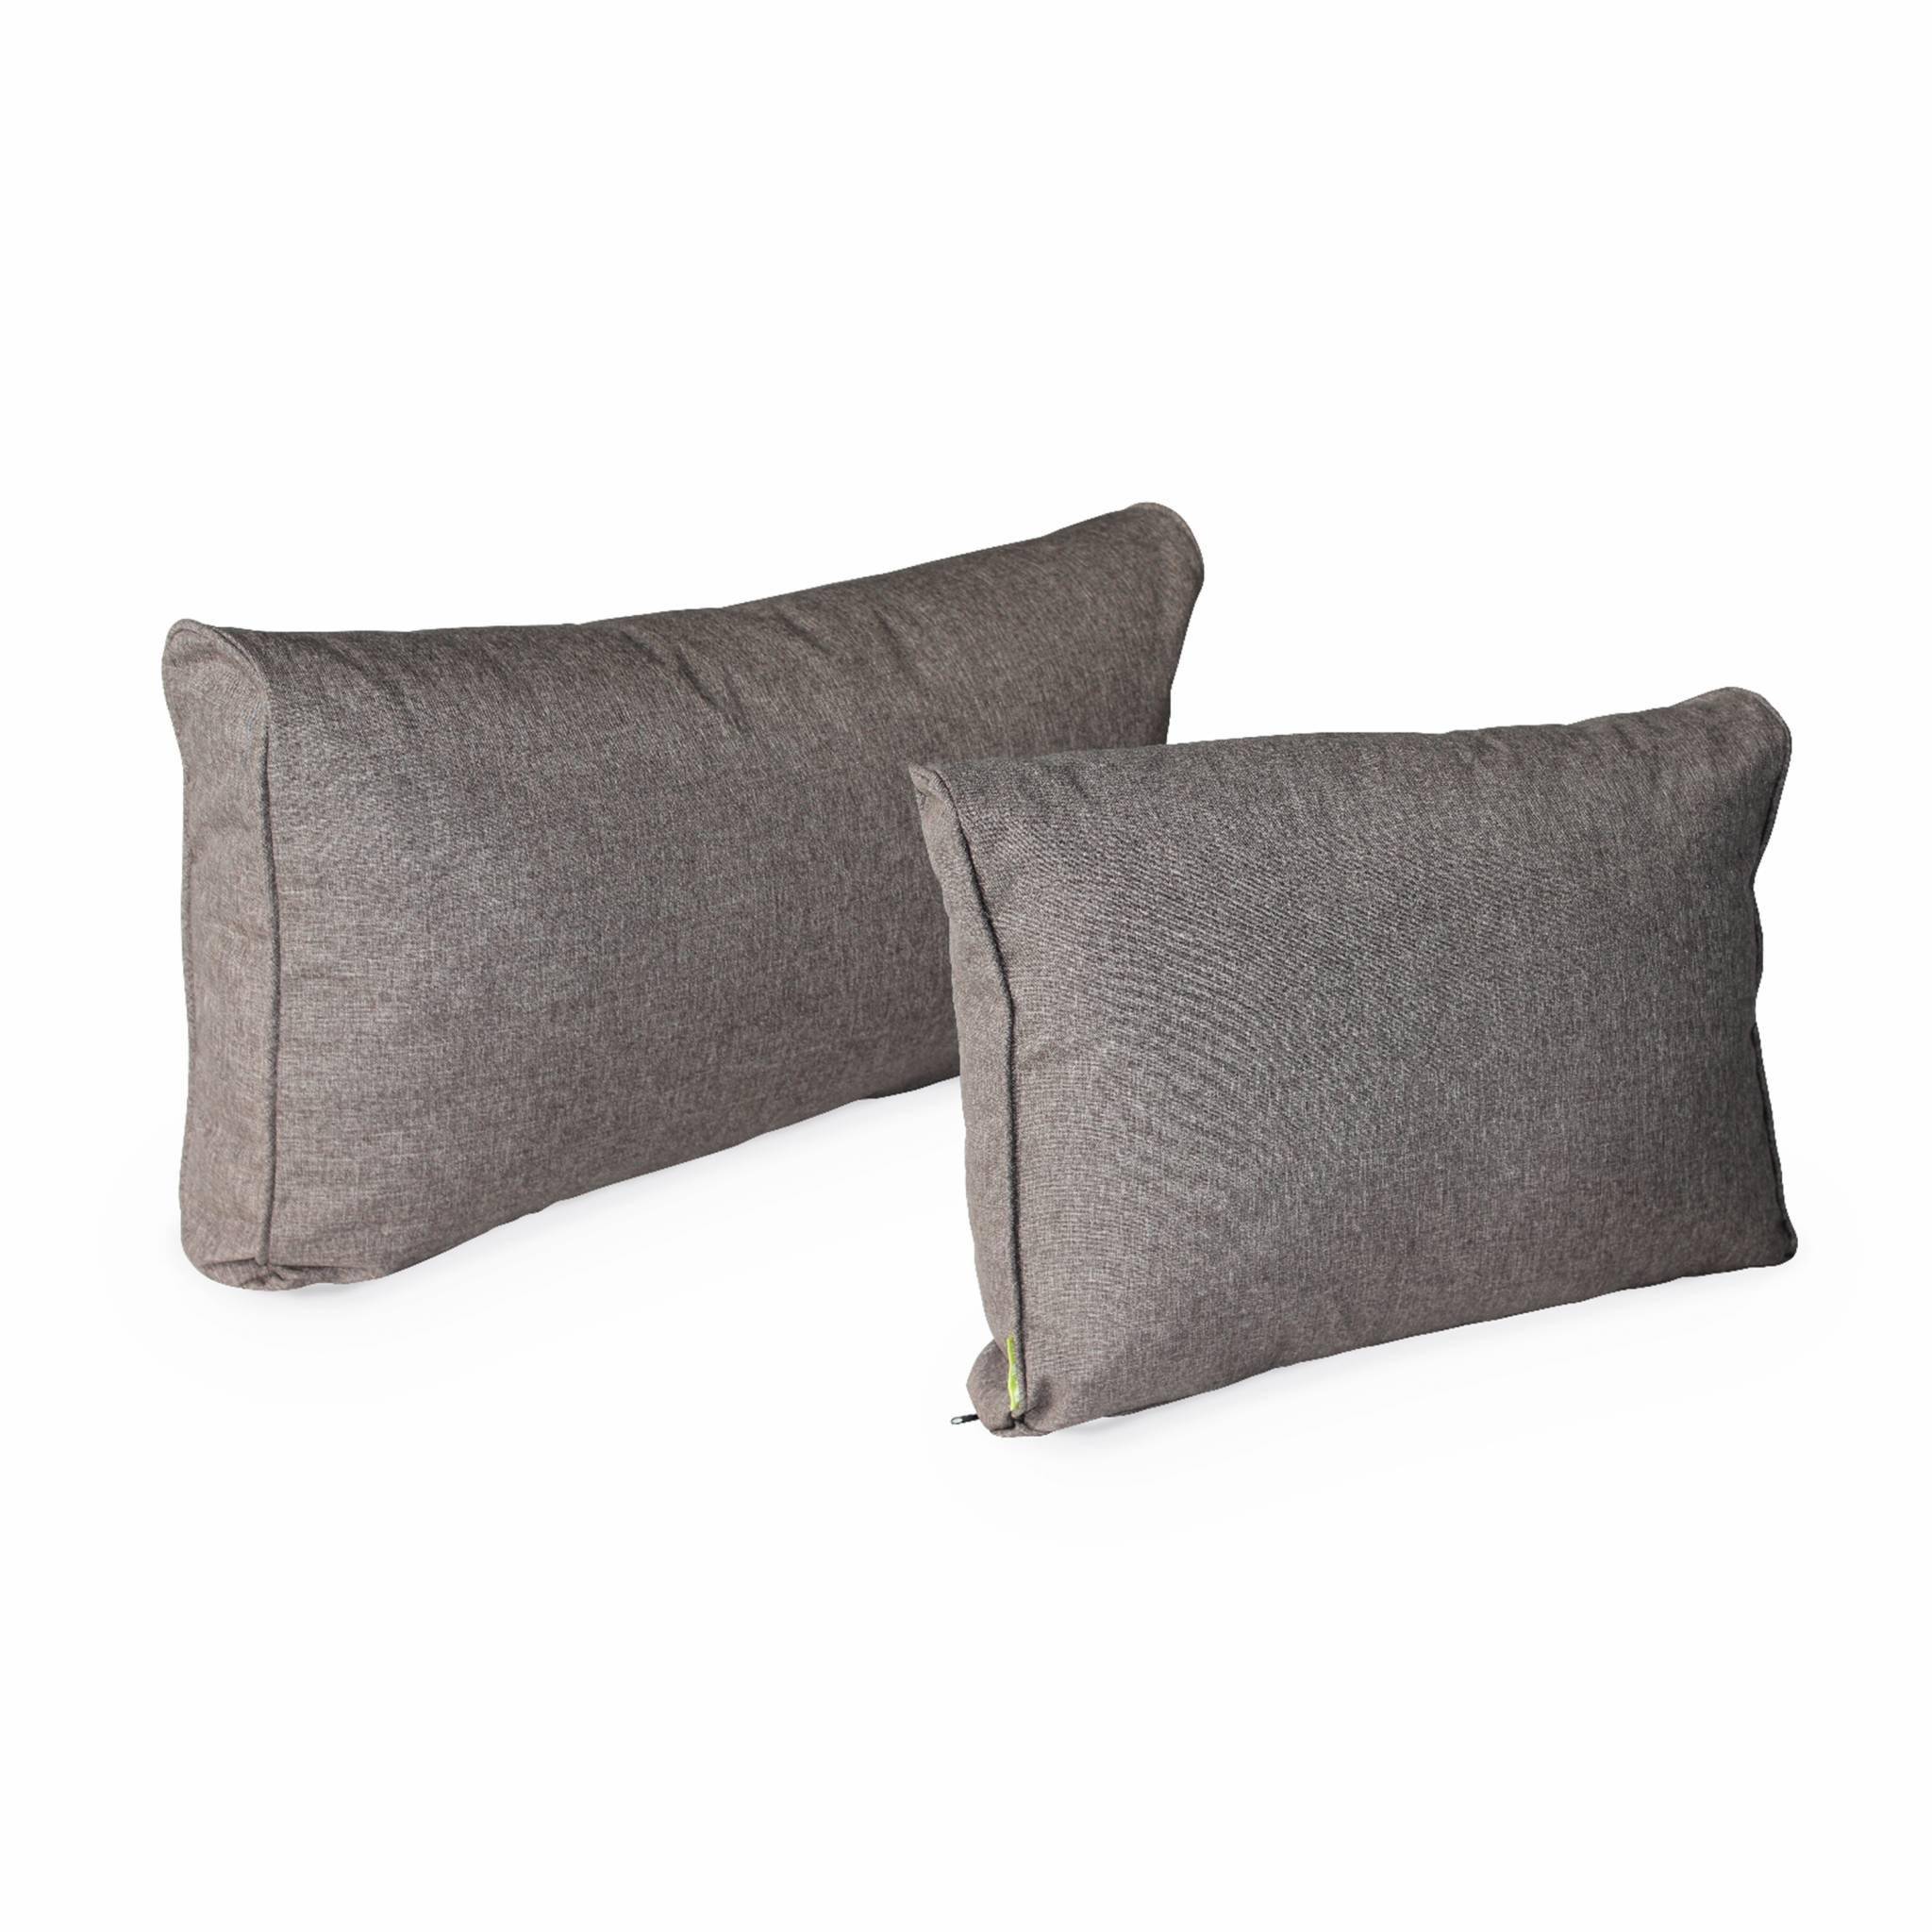 Complete set of cushion covers - Napoli - Heather Grey Photo2